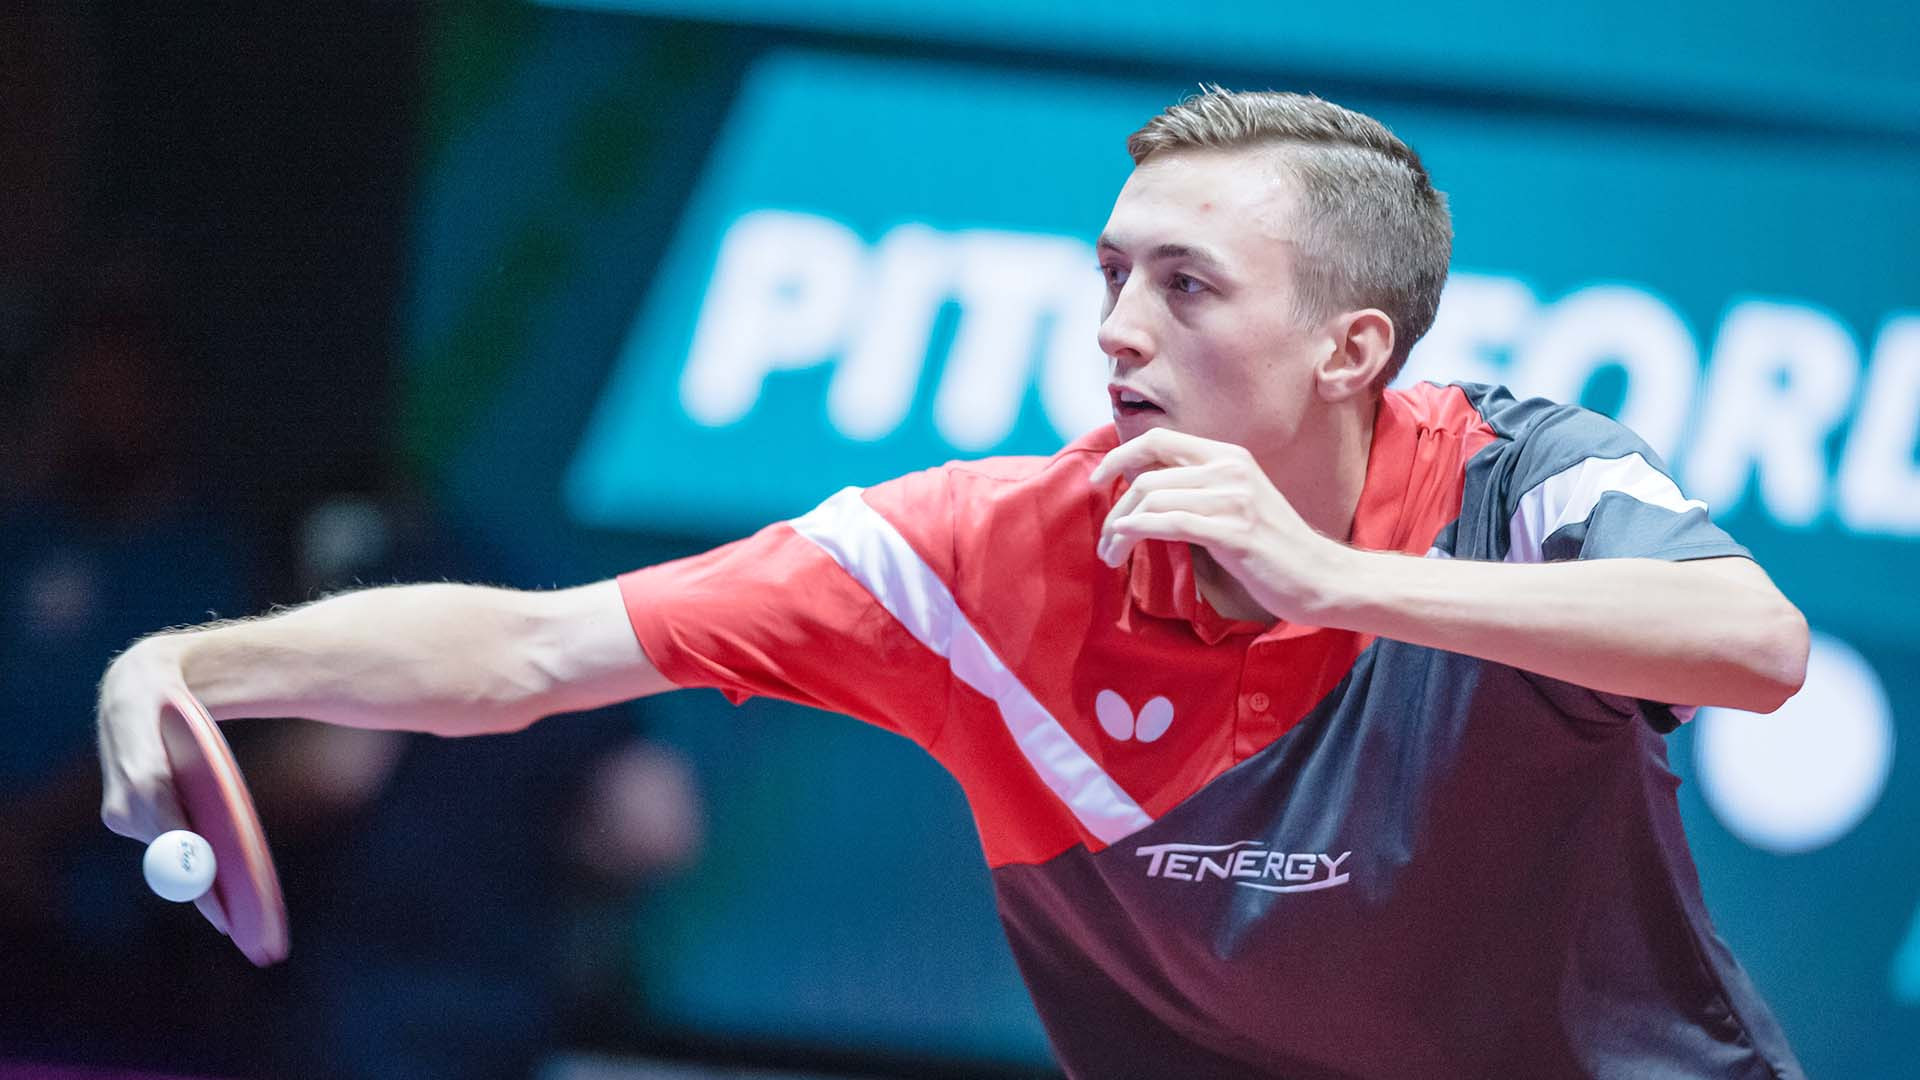 England's Liam Pitchford arrives at the continental event in good shape having beaten Olympic champion Ma Long of China last month ©ITTF